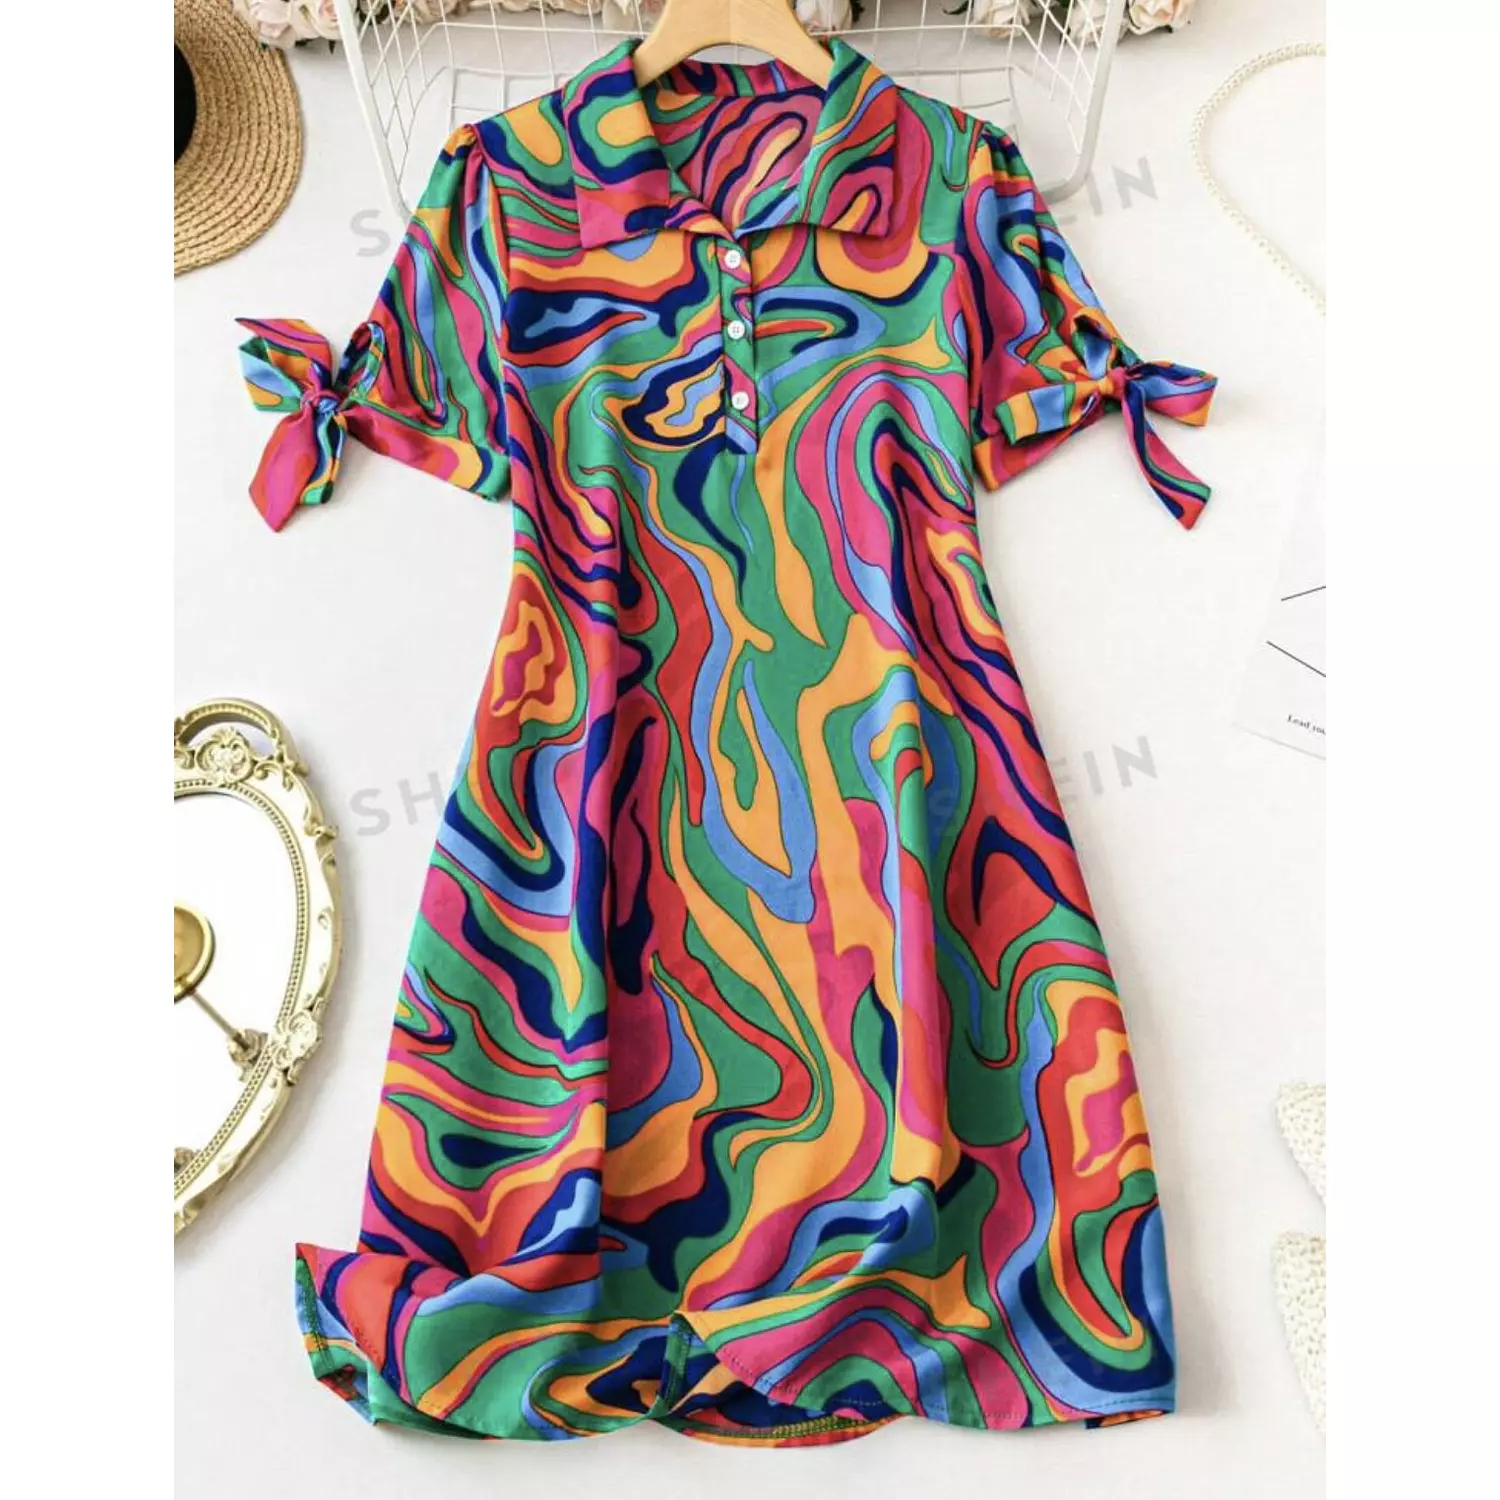 SHEIN DRESS 0xl hover image